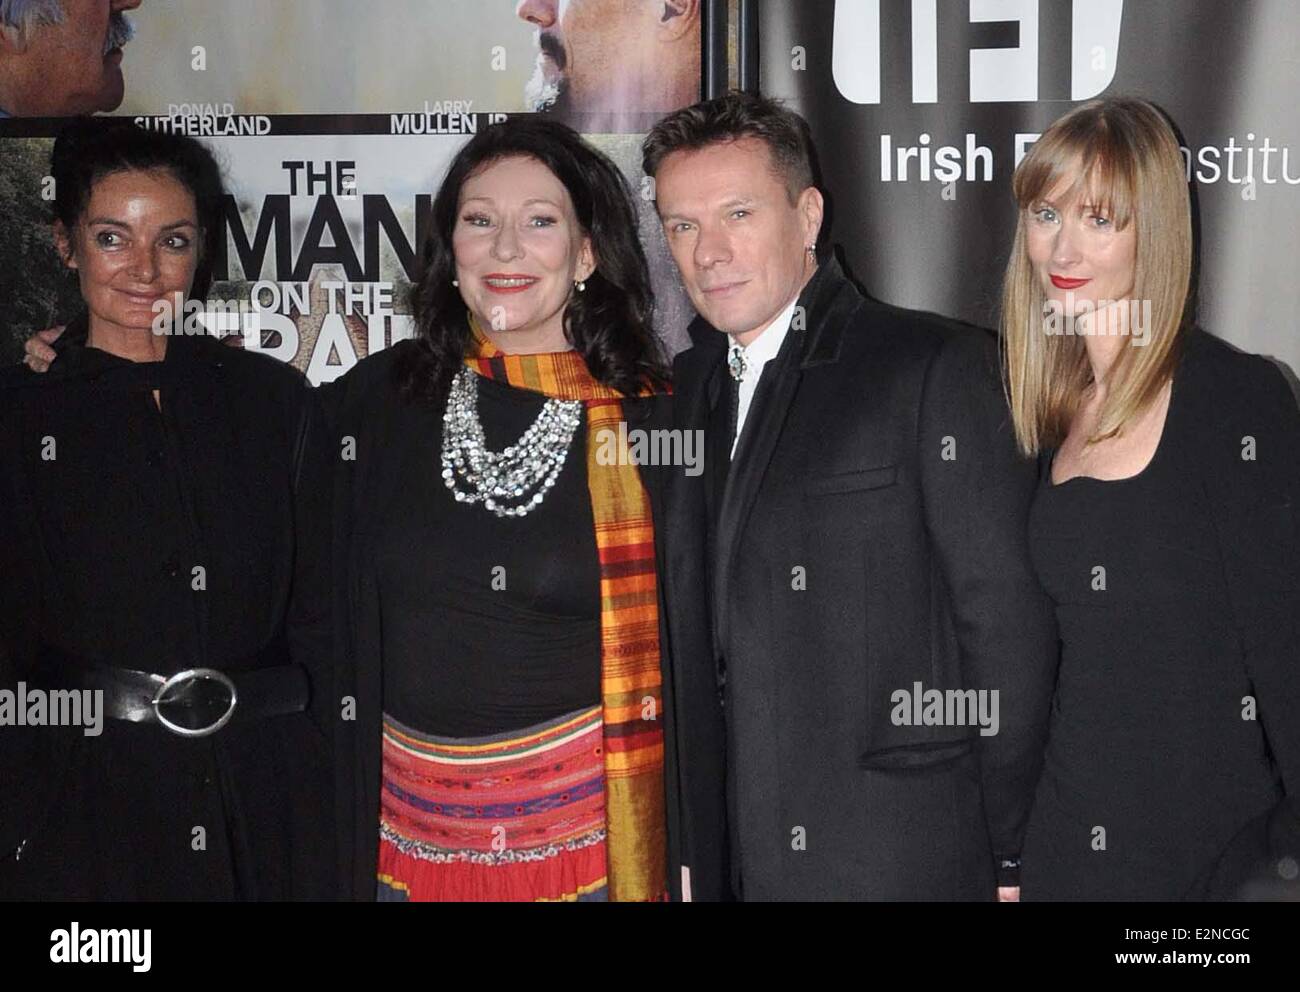 Opening night of 'Man on the Train', a film starring U2 drummer Larry Mullen Jr., held at the IFI in Dublin  Featuring: Mary McGuckian,Kate O'Toole,Larry Mullen Jr.,Ann Acheson Where: Dublin, Ireland When: 11 Jan 2013  **Not available for publication in Irish Tabloids or Irish magazines** Stock Photo